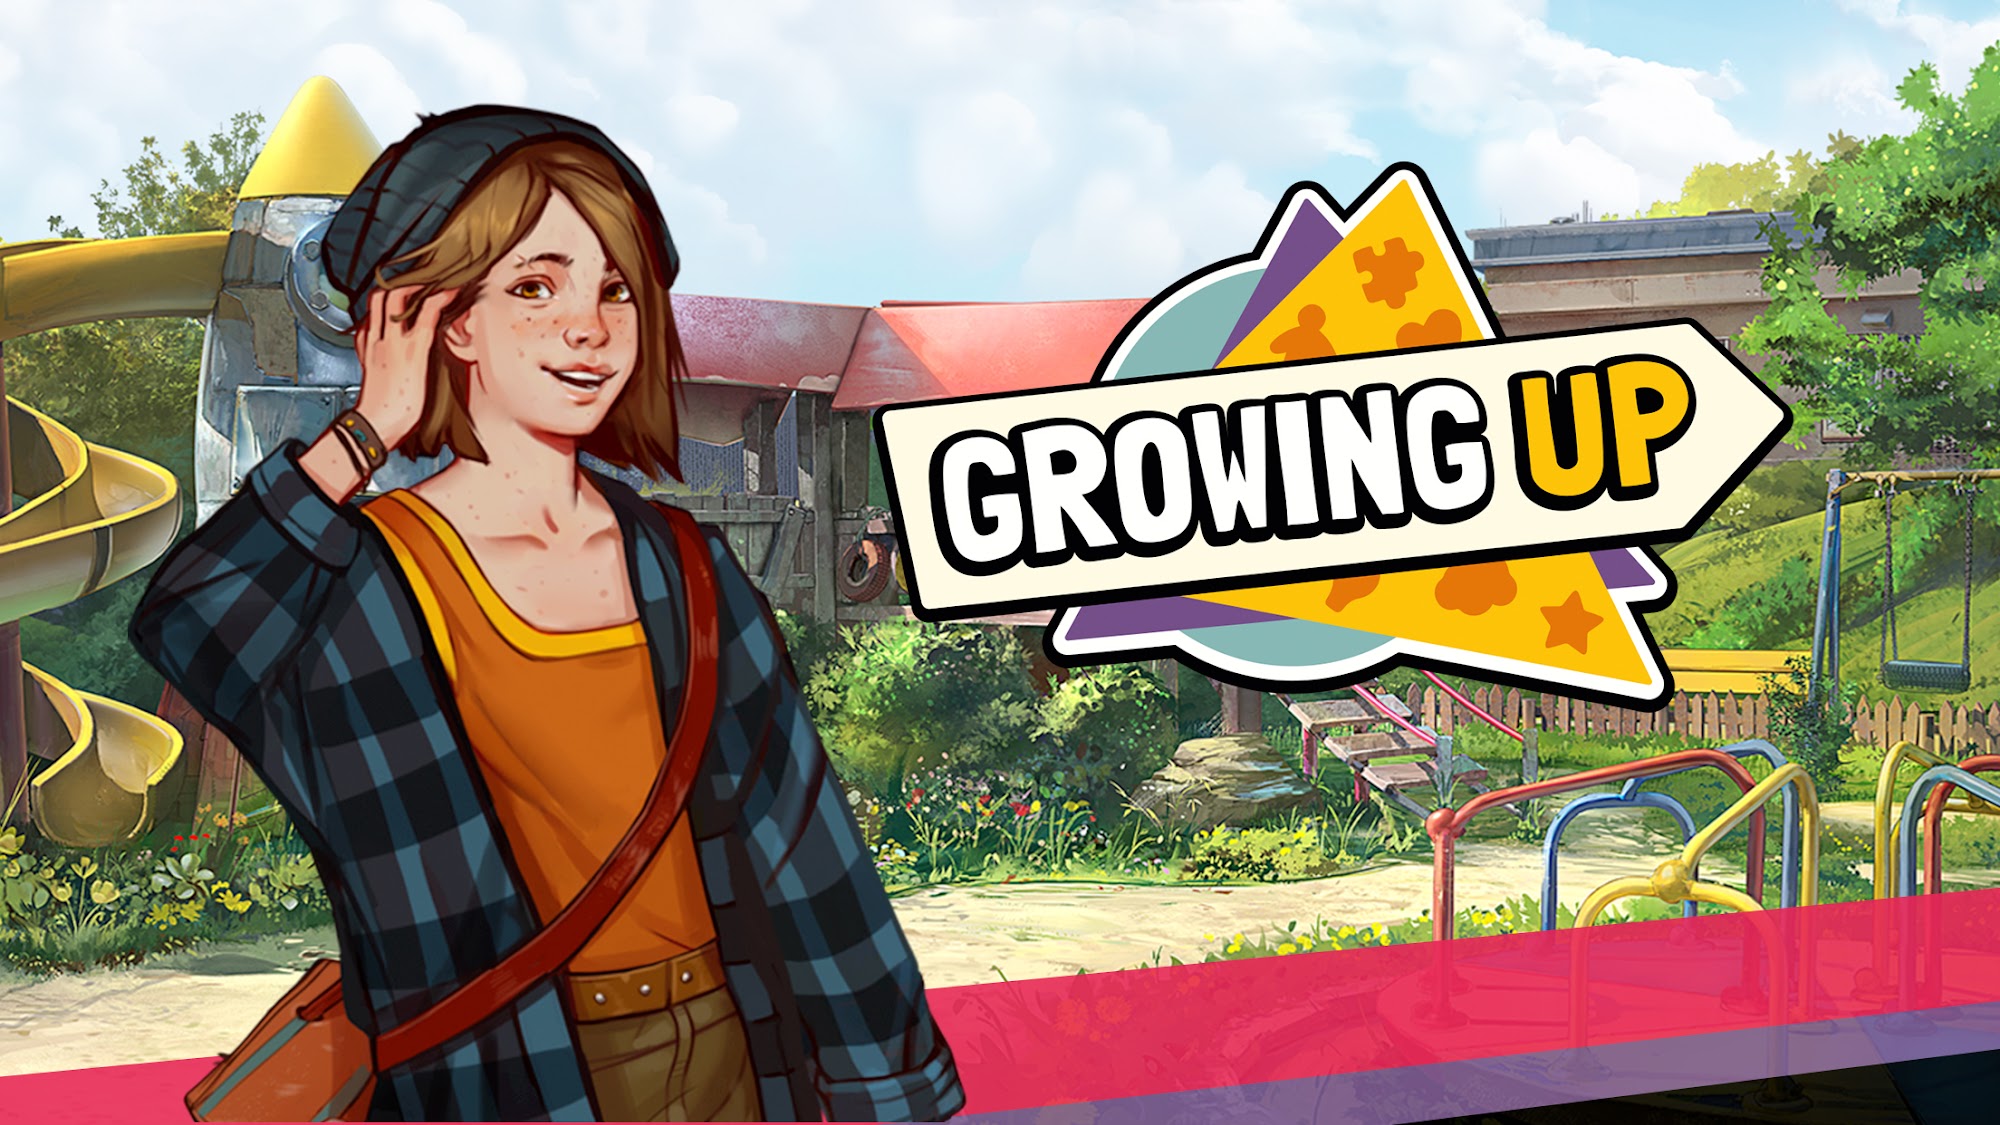 Download Growing Up: Life of the ’90s für Android kostenlos.